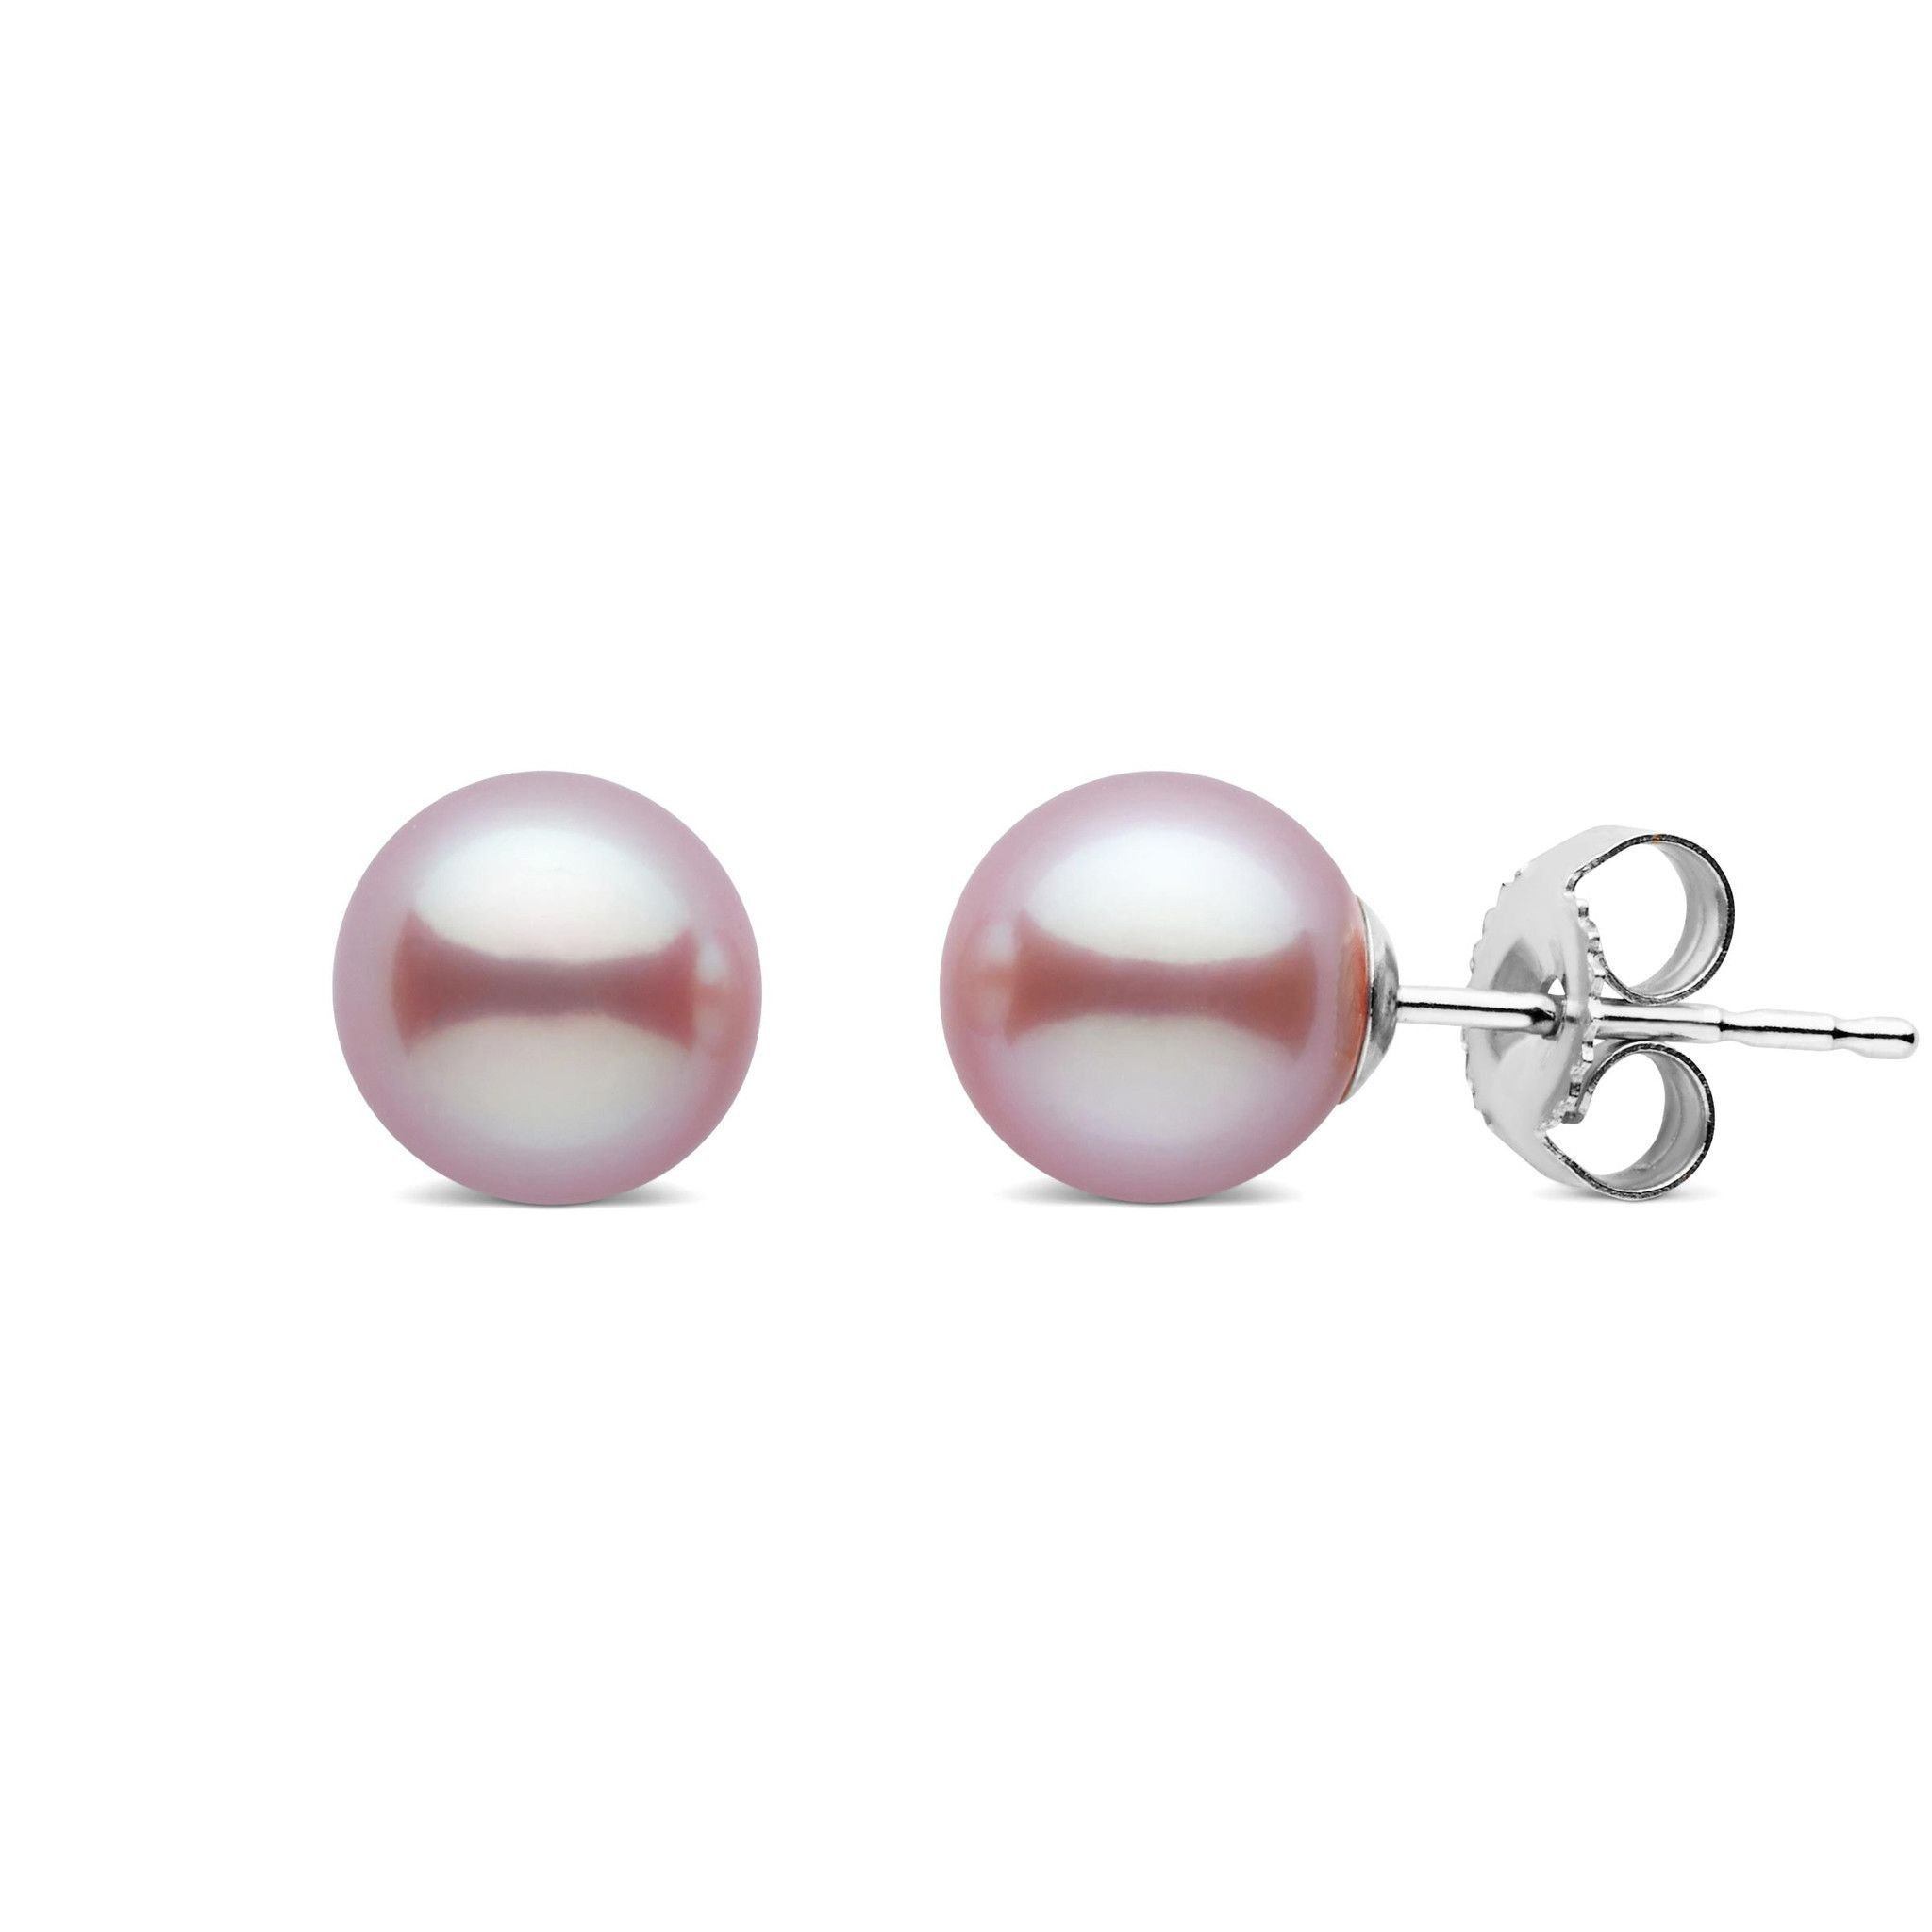 Products 6.5-7.0 mm Lavender Freshadama Freshwater Pearl Stud Earrings White Gold